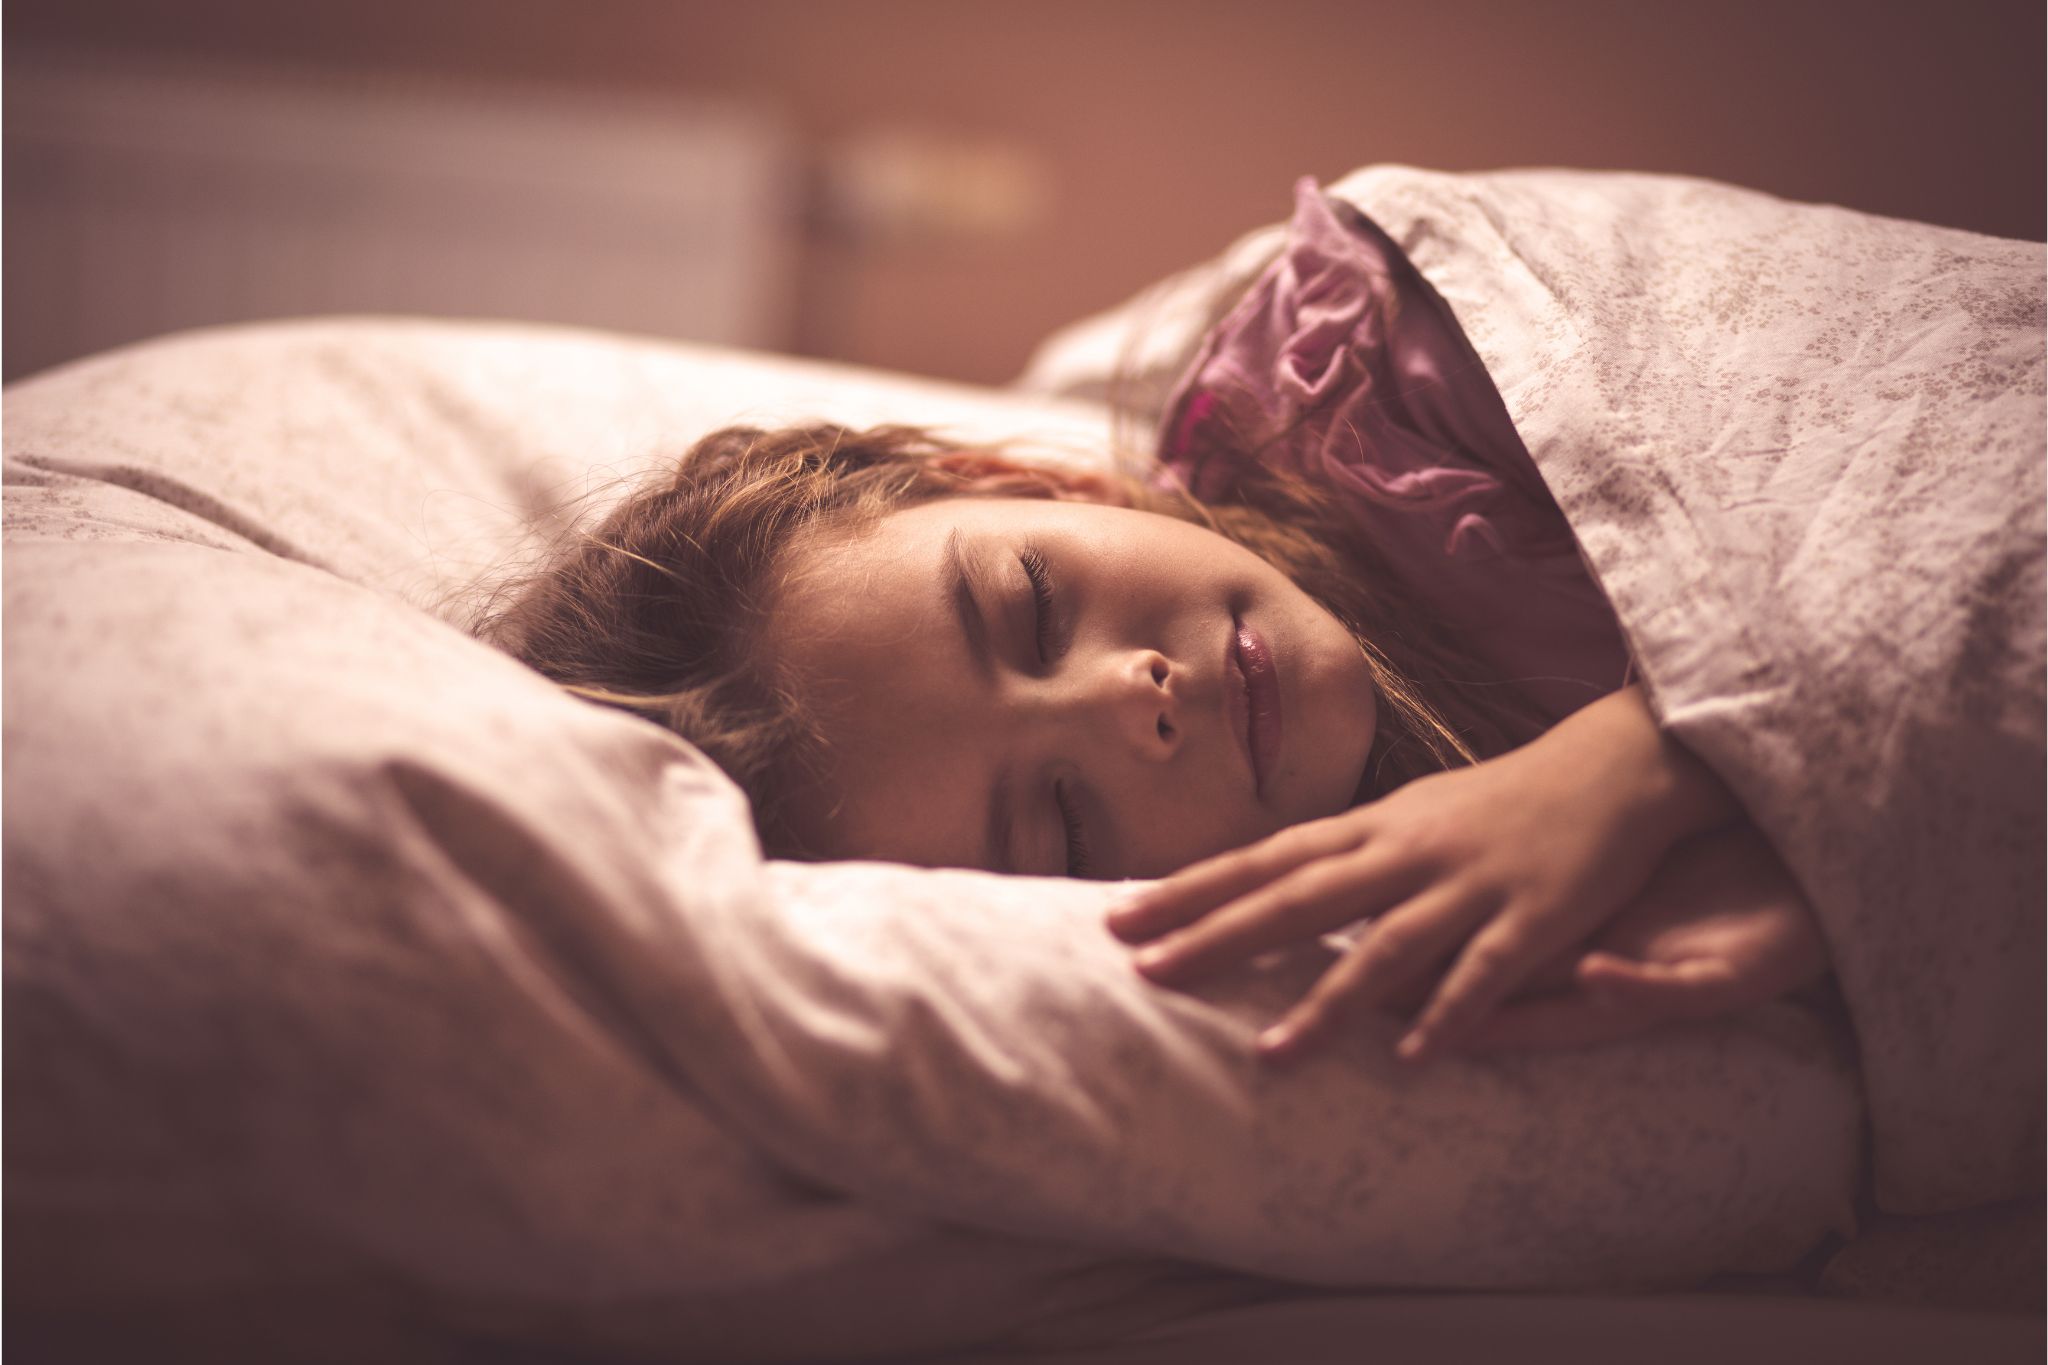 Everyday Health - What's the one thing you need to help you fall asleep? 😴  The ideal sleep environment is cool, quiet, and dark. Get tips for sleeping  better here